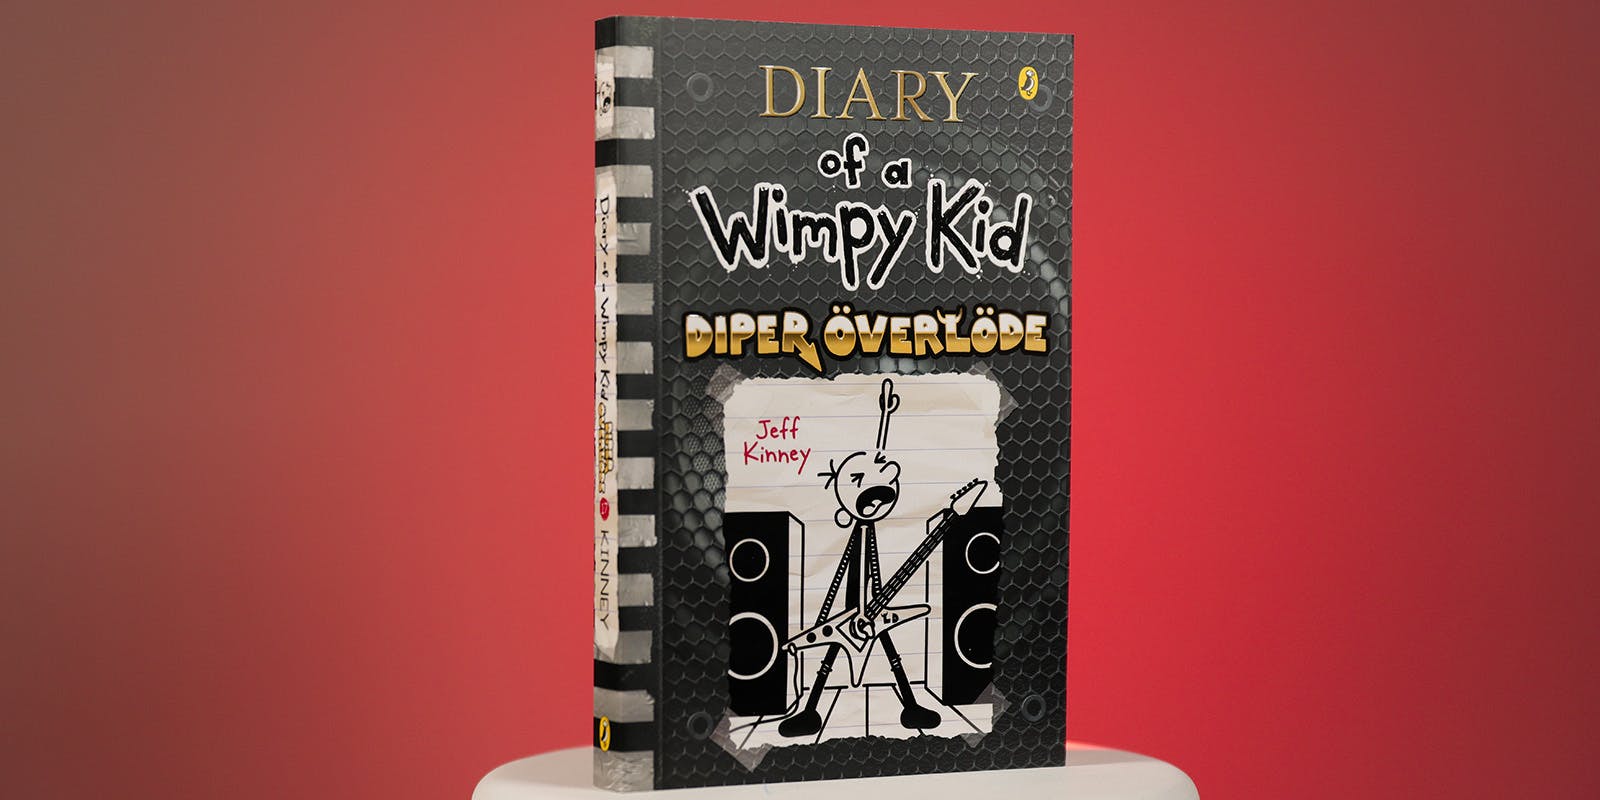 The worldwide phenomenon, Greg Heffley, is back with a new book!